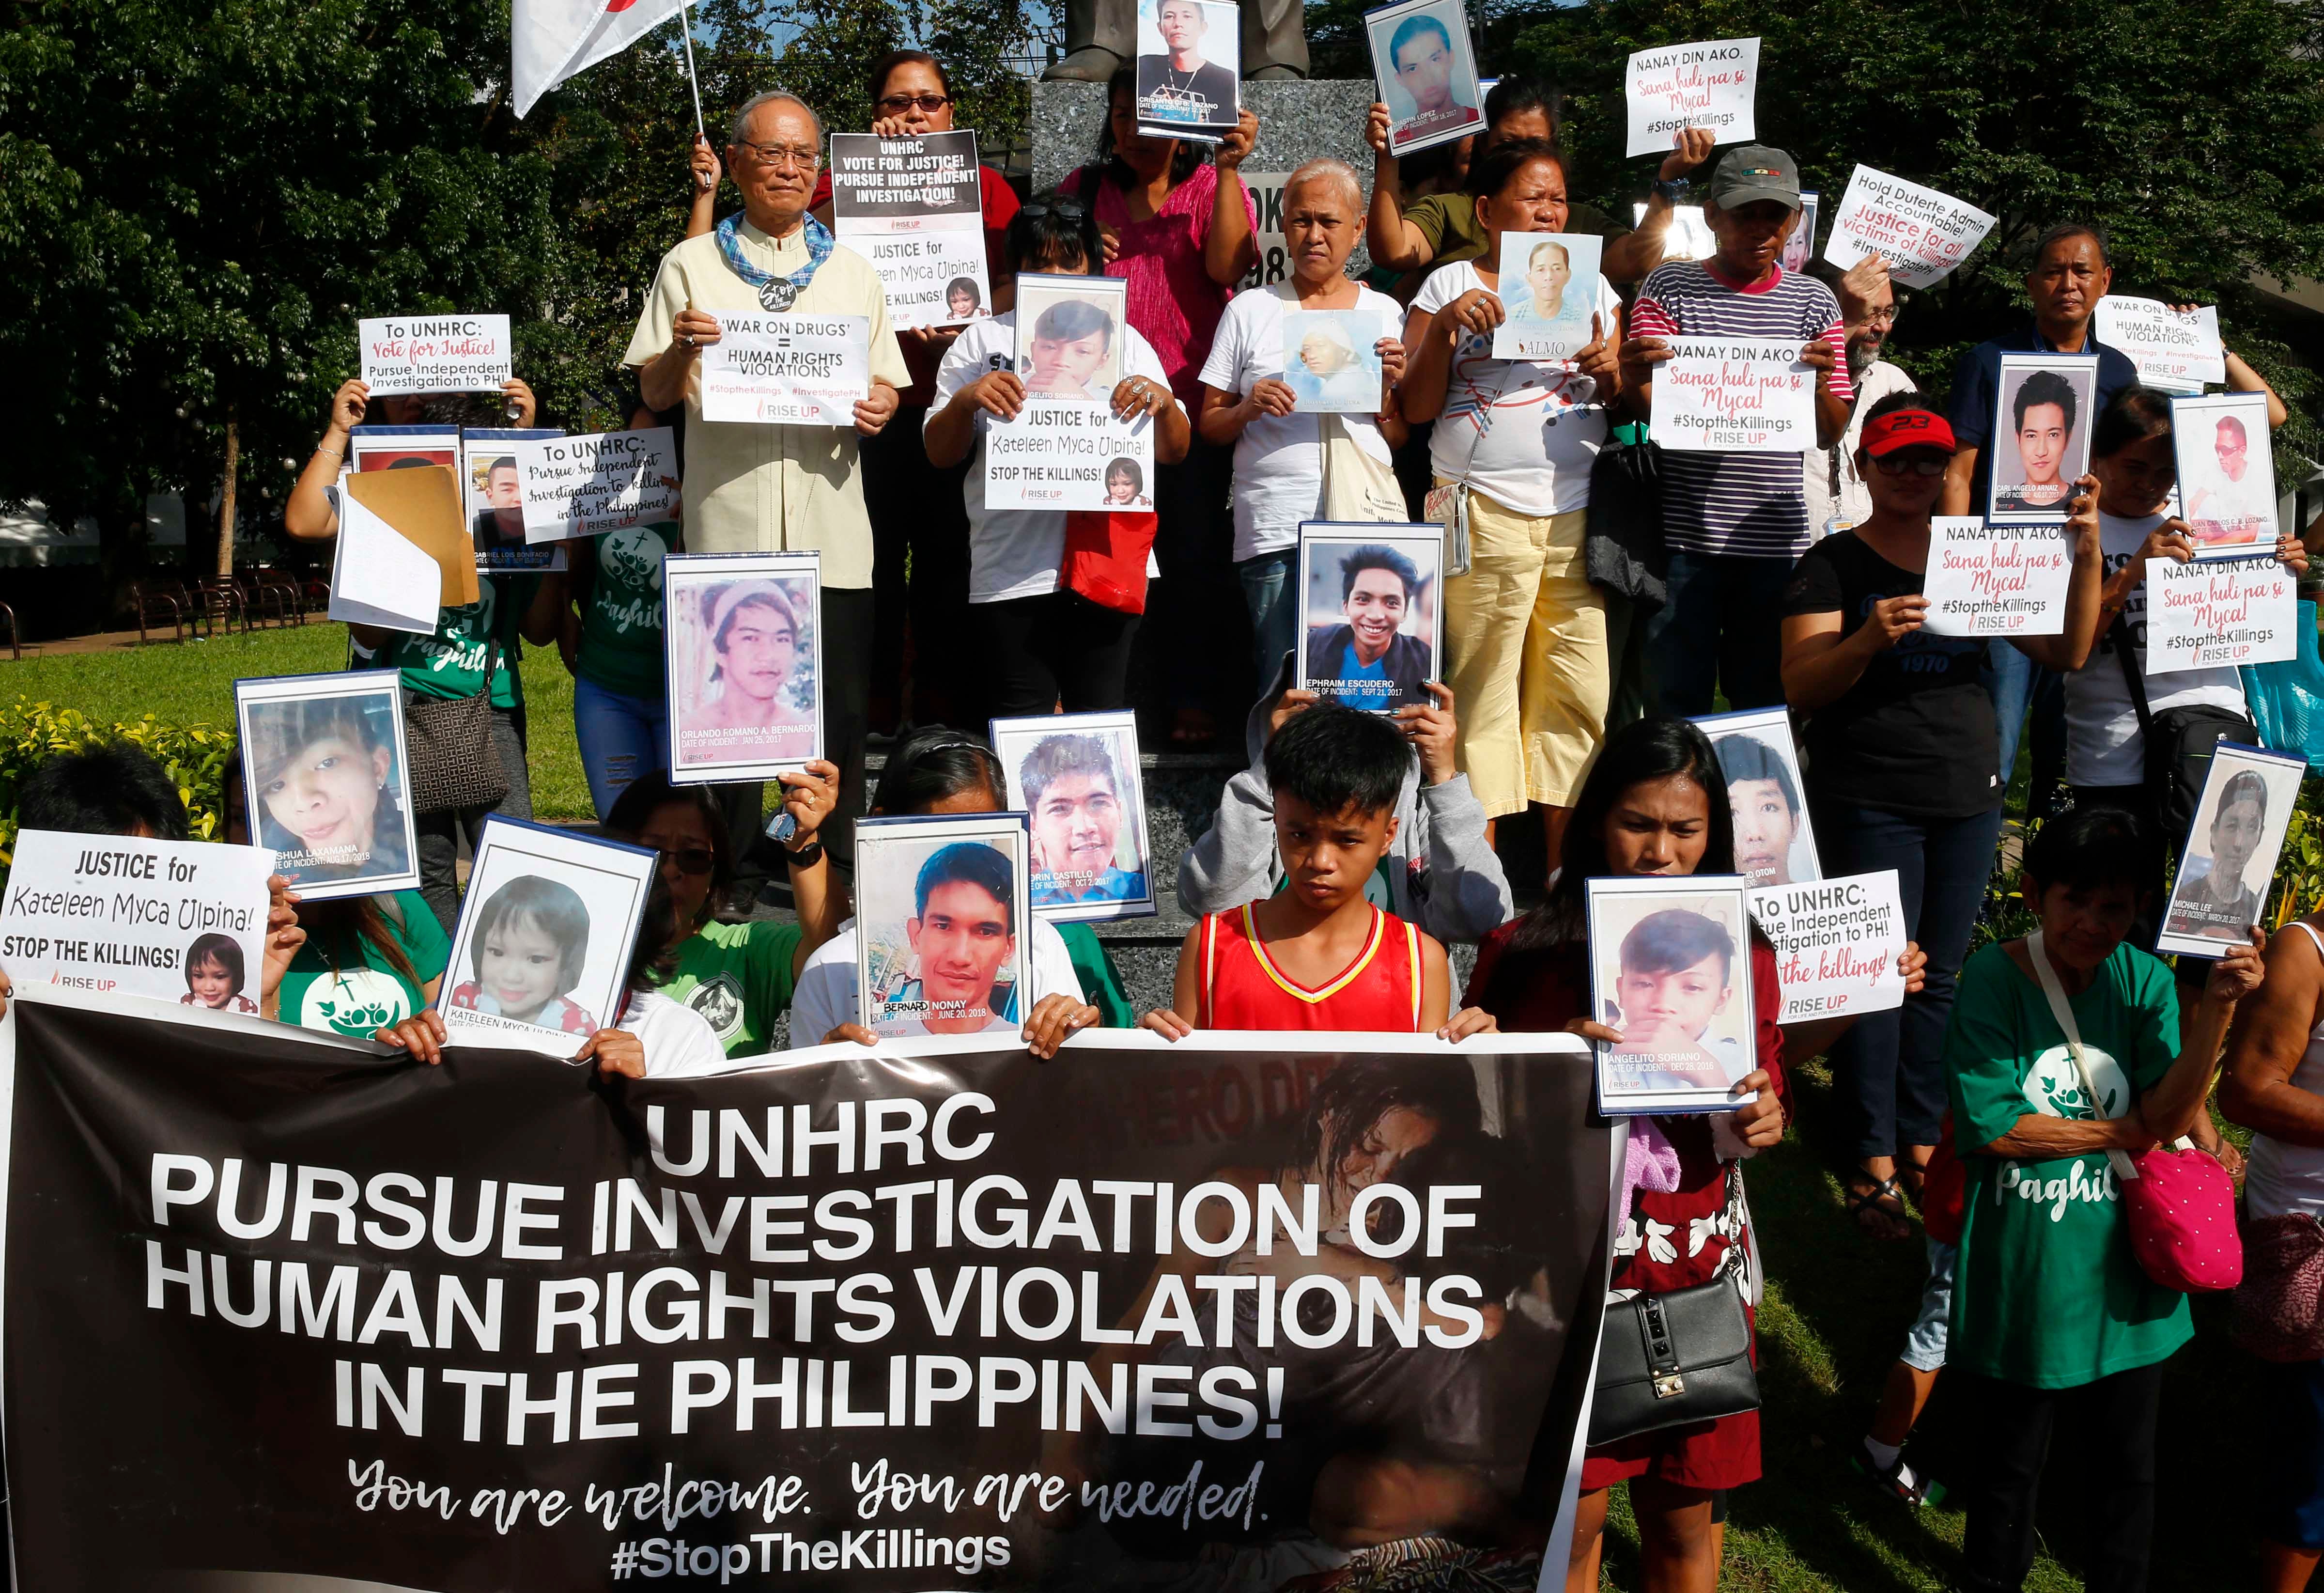 Families of victims of extrajudicial killings in the "war on drugs" display portraits of their slain relatives and call on the UN Human Rights Council to investigate the killings, in Quezon City, Philippines, July 9, 2019.